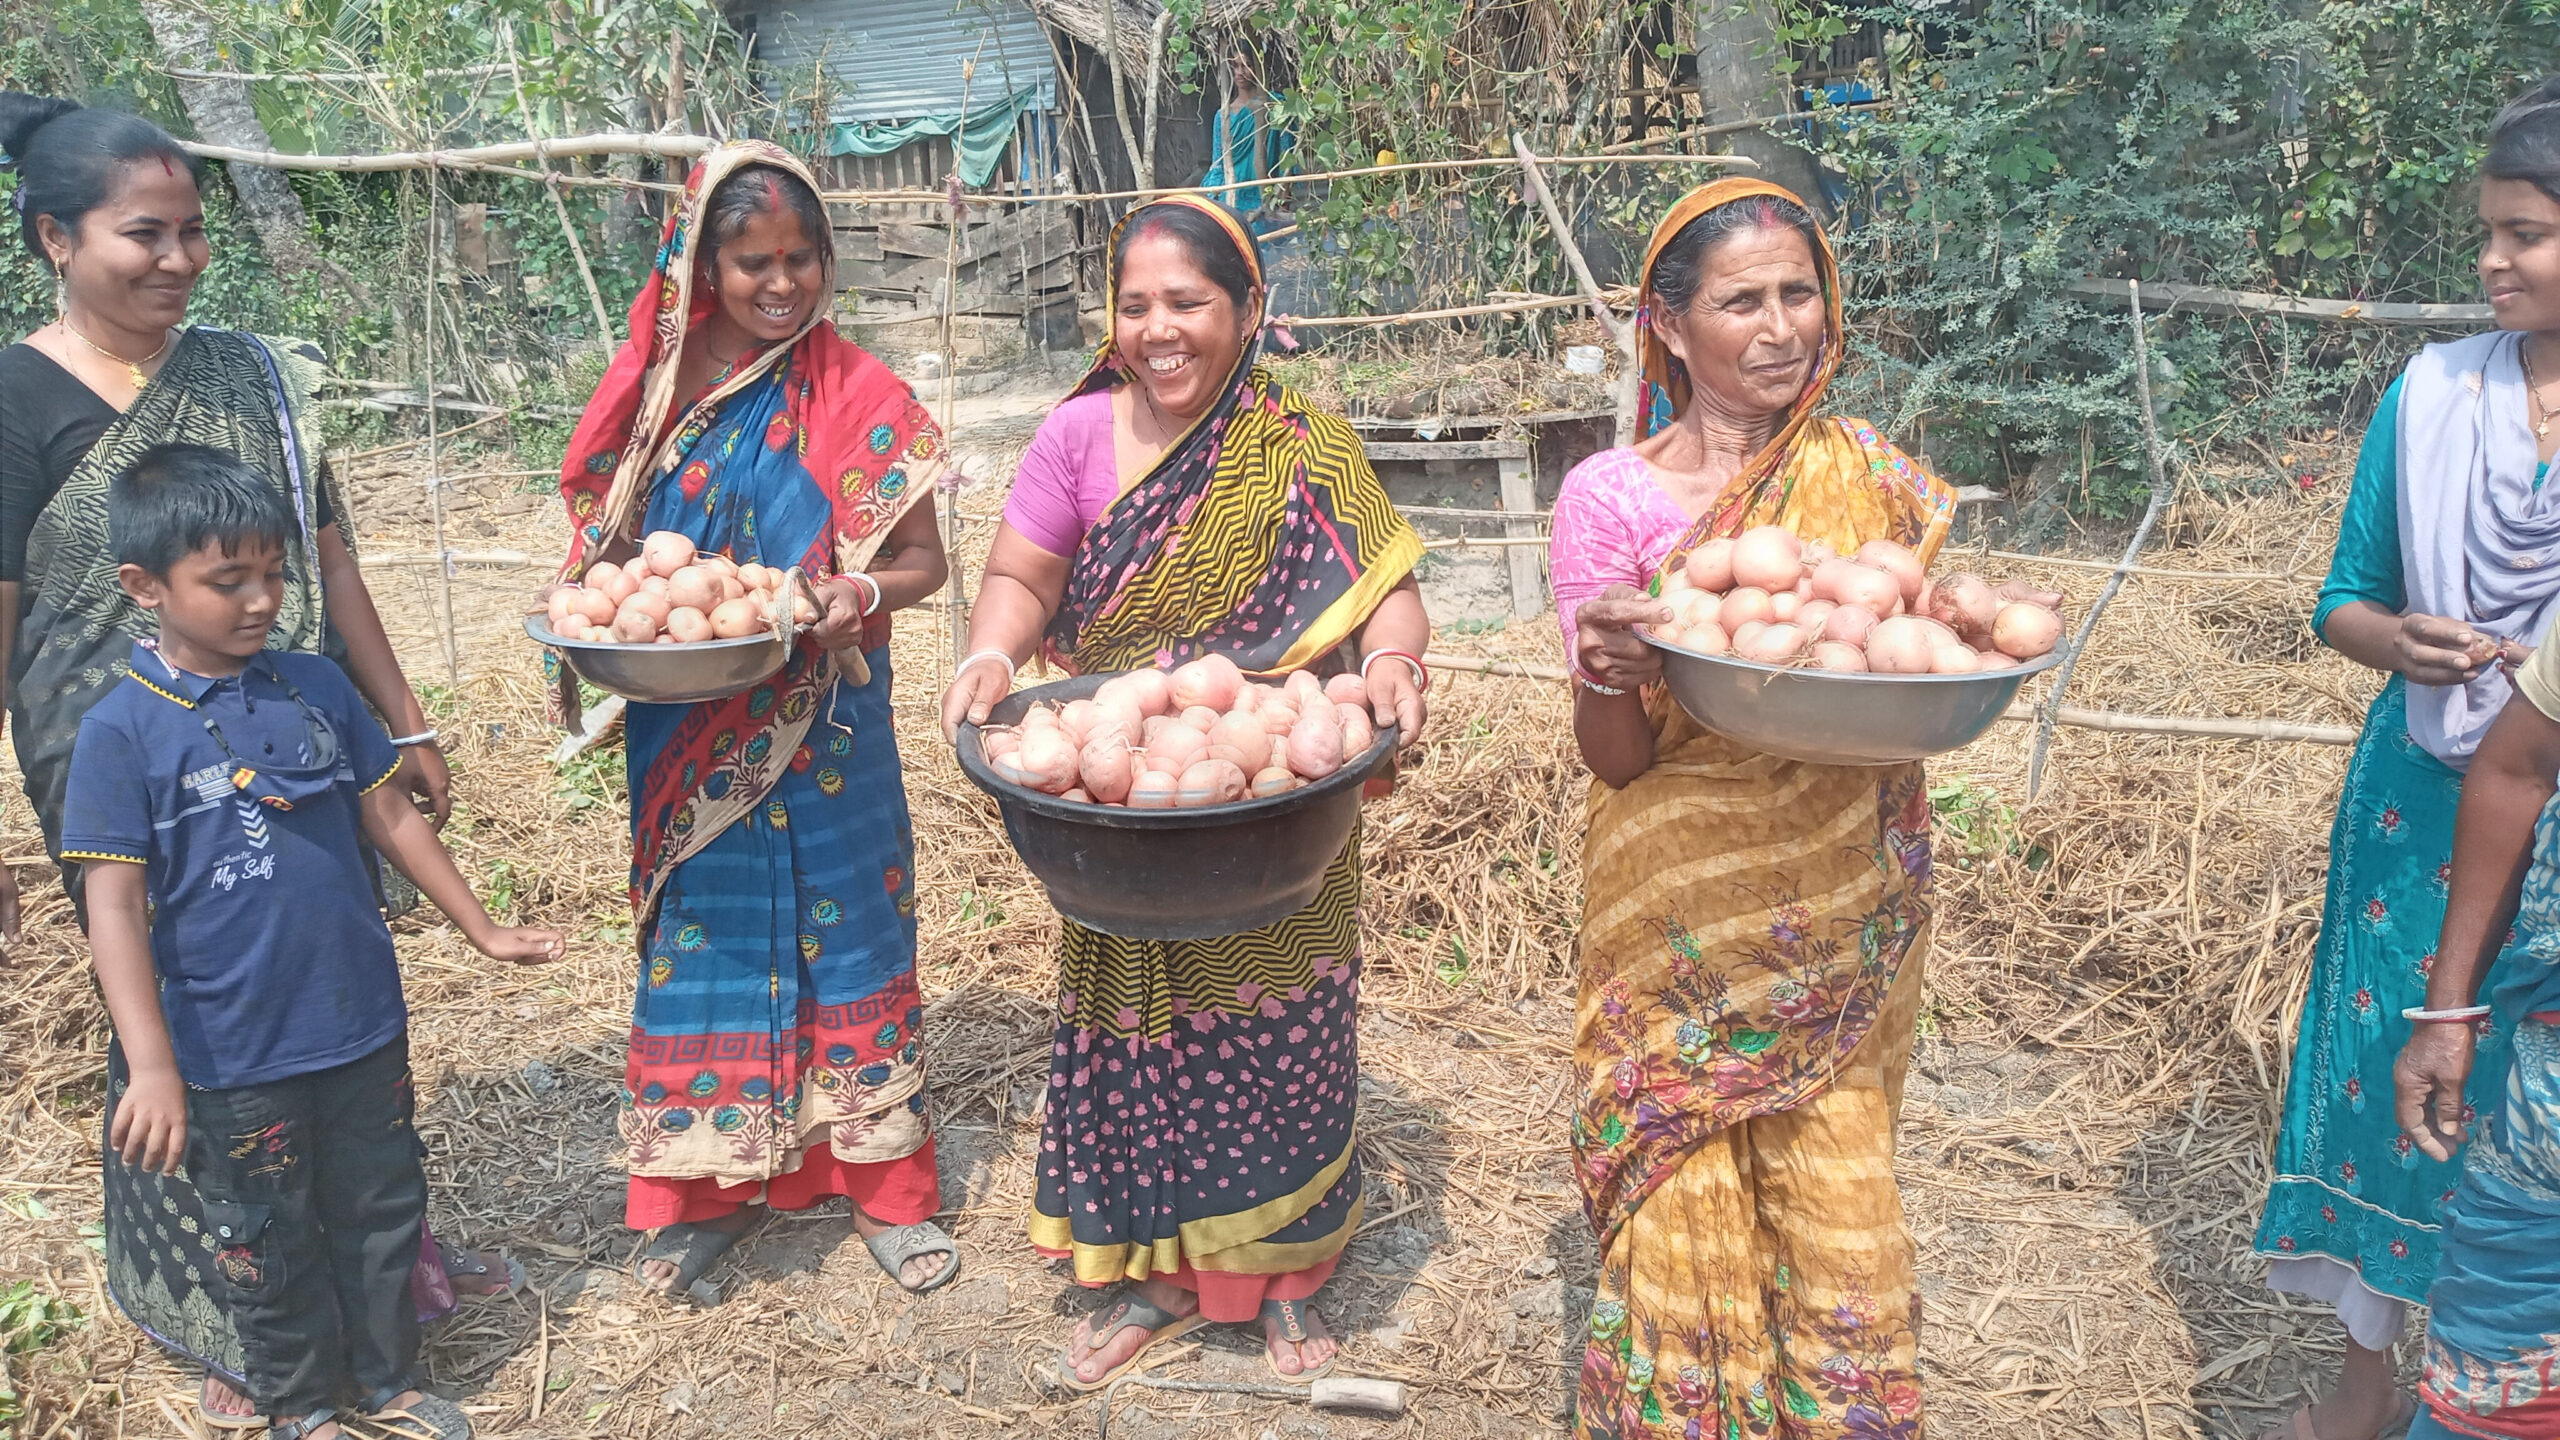 The adoption of the potato zero tillage approach has notable gender implications, providing increased opportunities for women.